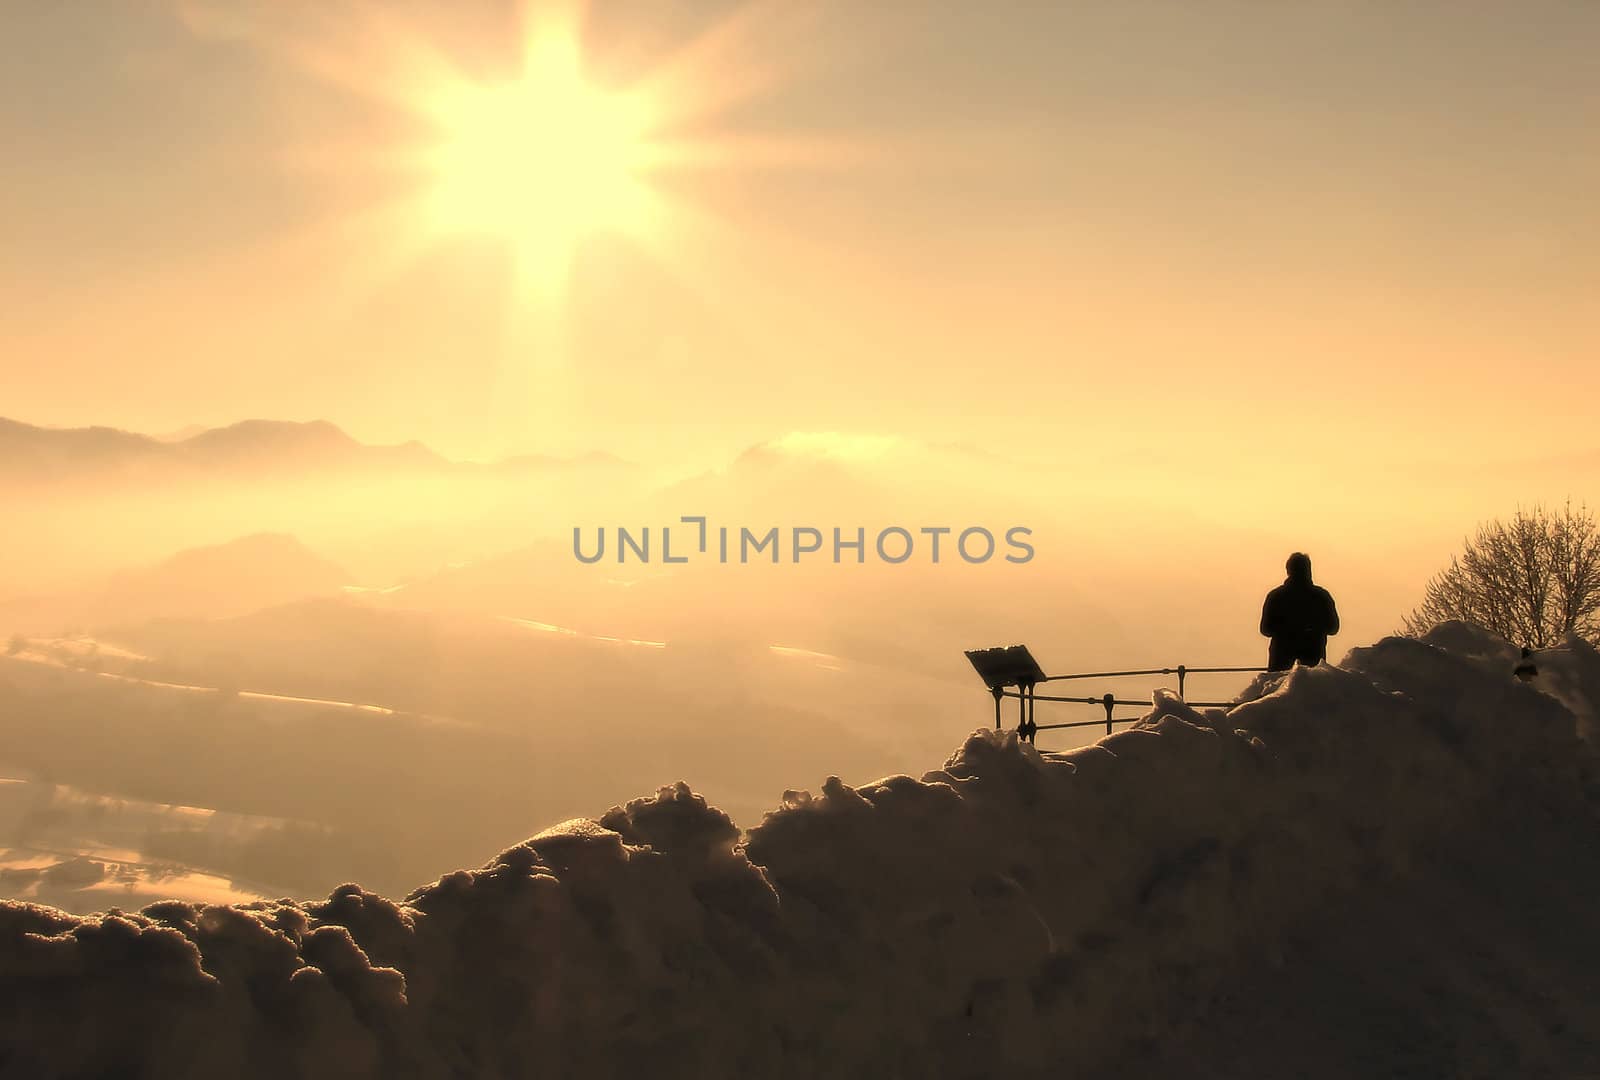 Silhouette of a man in a winter landscape looking at the mountains in the distance